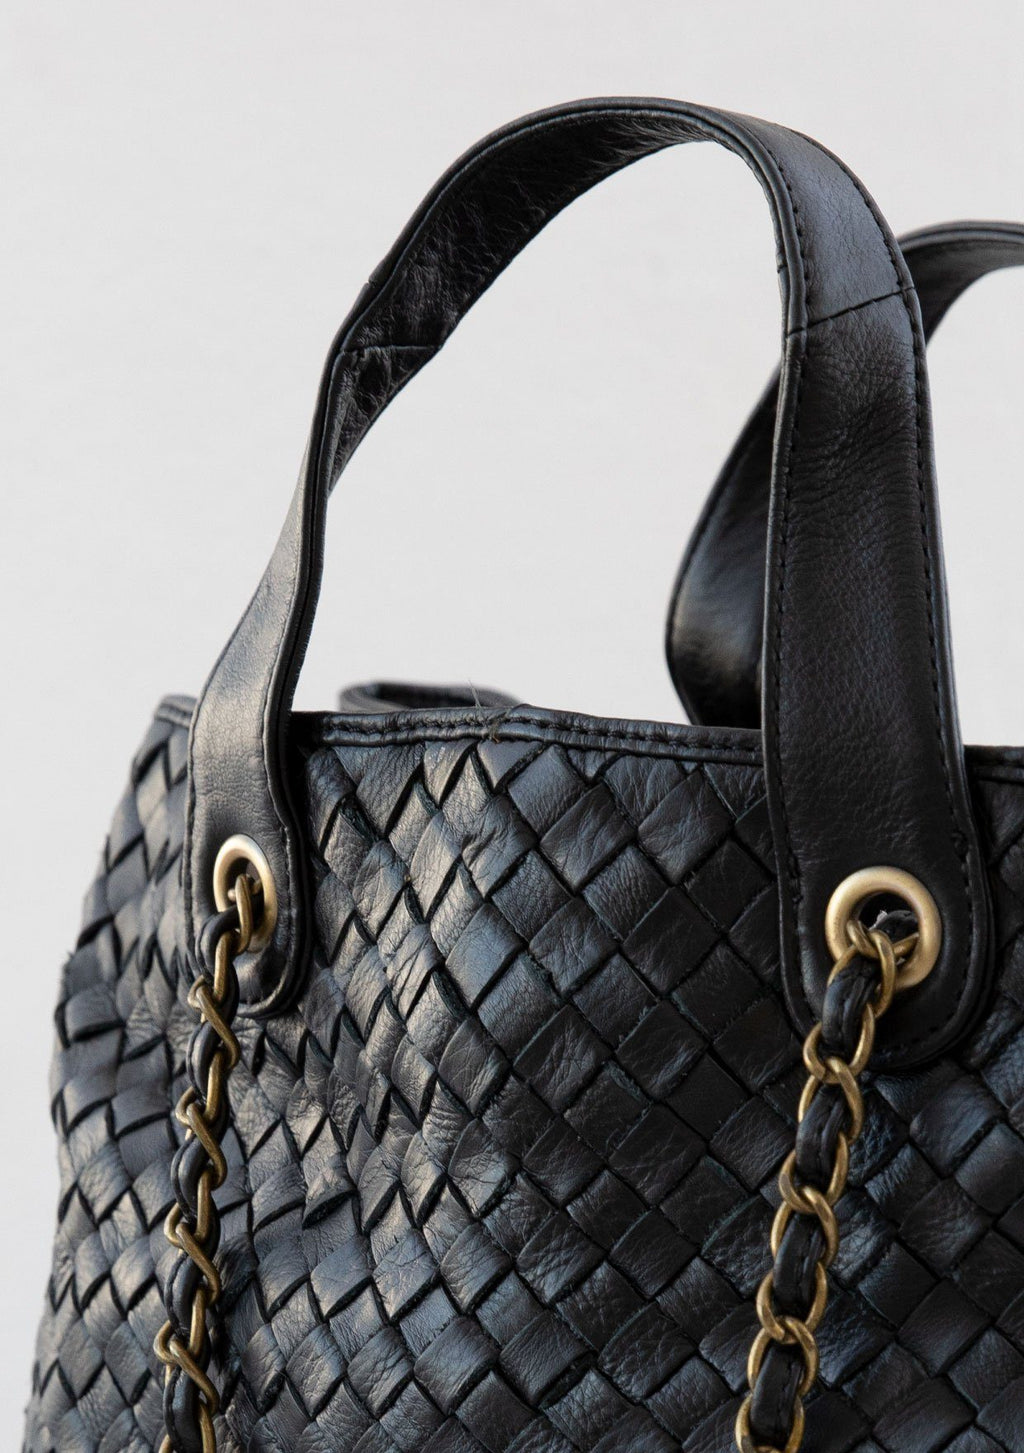 SUPERB Big Purse in Woven Braided Leather